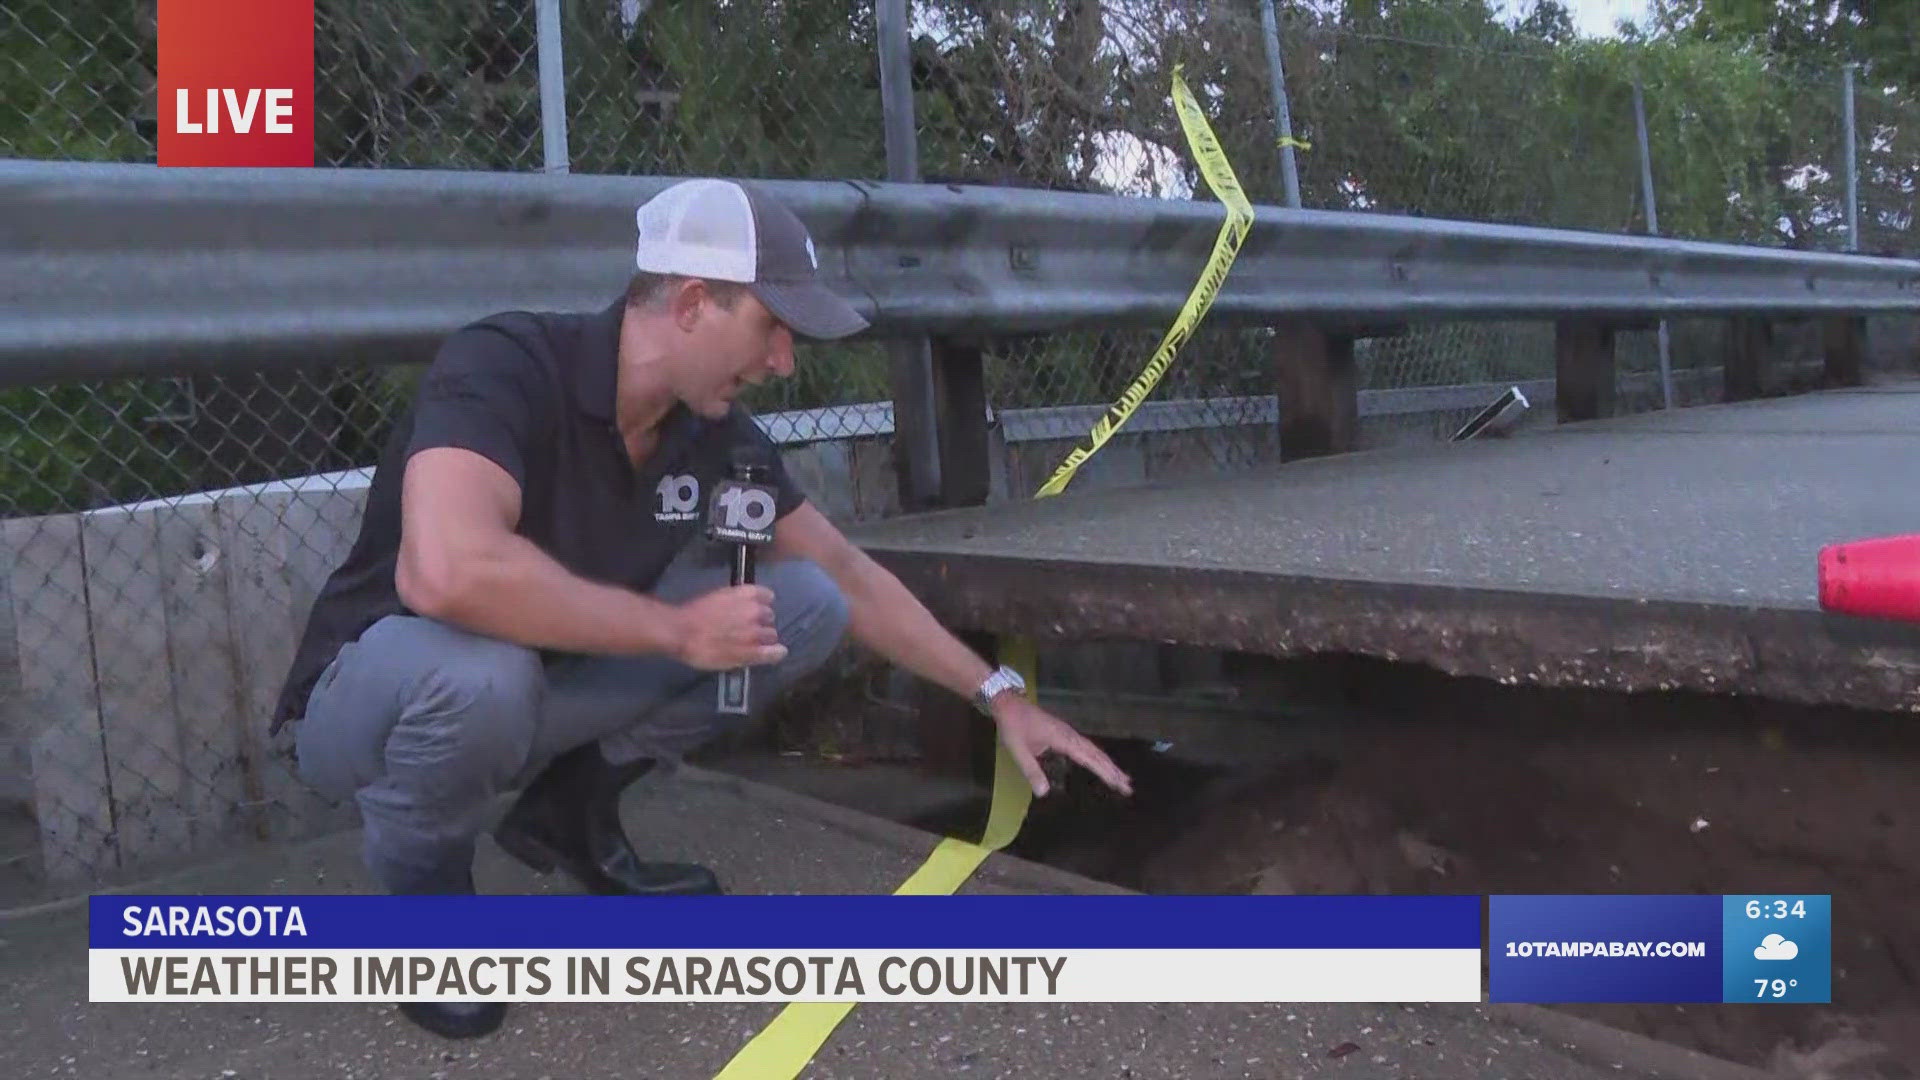 10 Tampa Bay's Nick Volturo provides more details as flooding and heavy rain continue to hit Sarasota County and other areas in Florida.